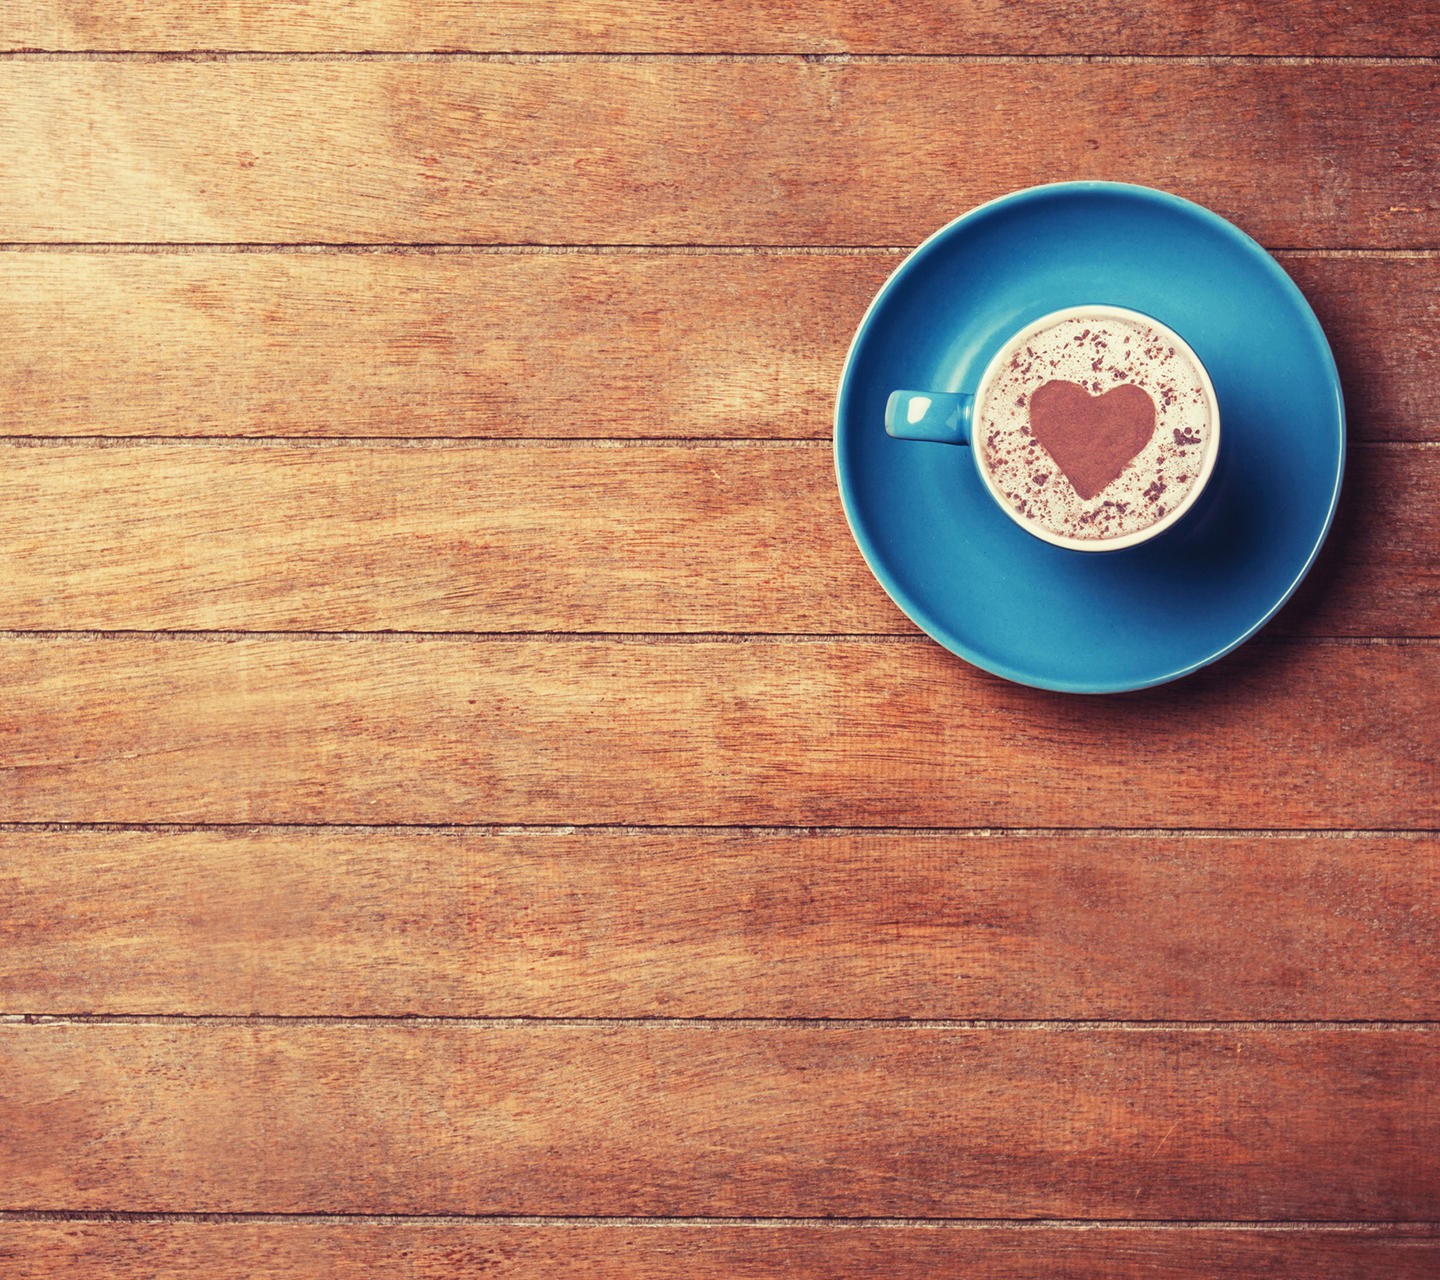 General 1440x1280 cup wooden surface blue coffee food Heart (Food)